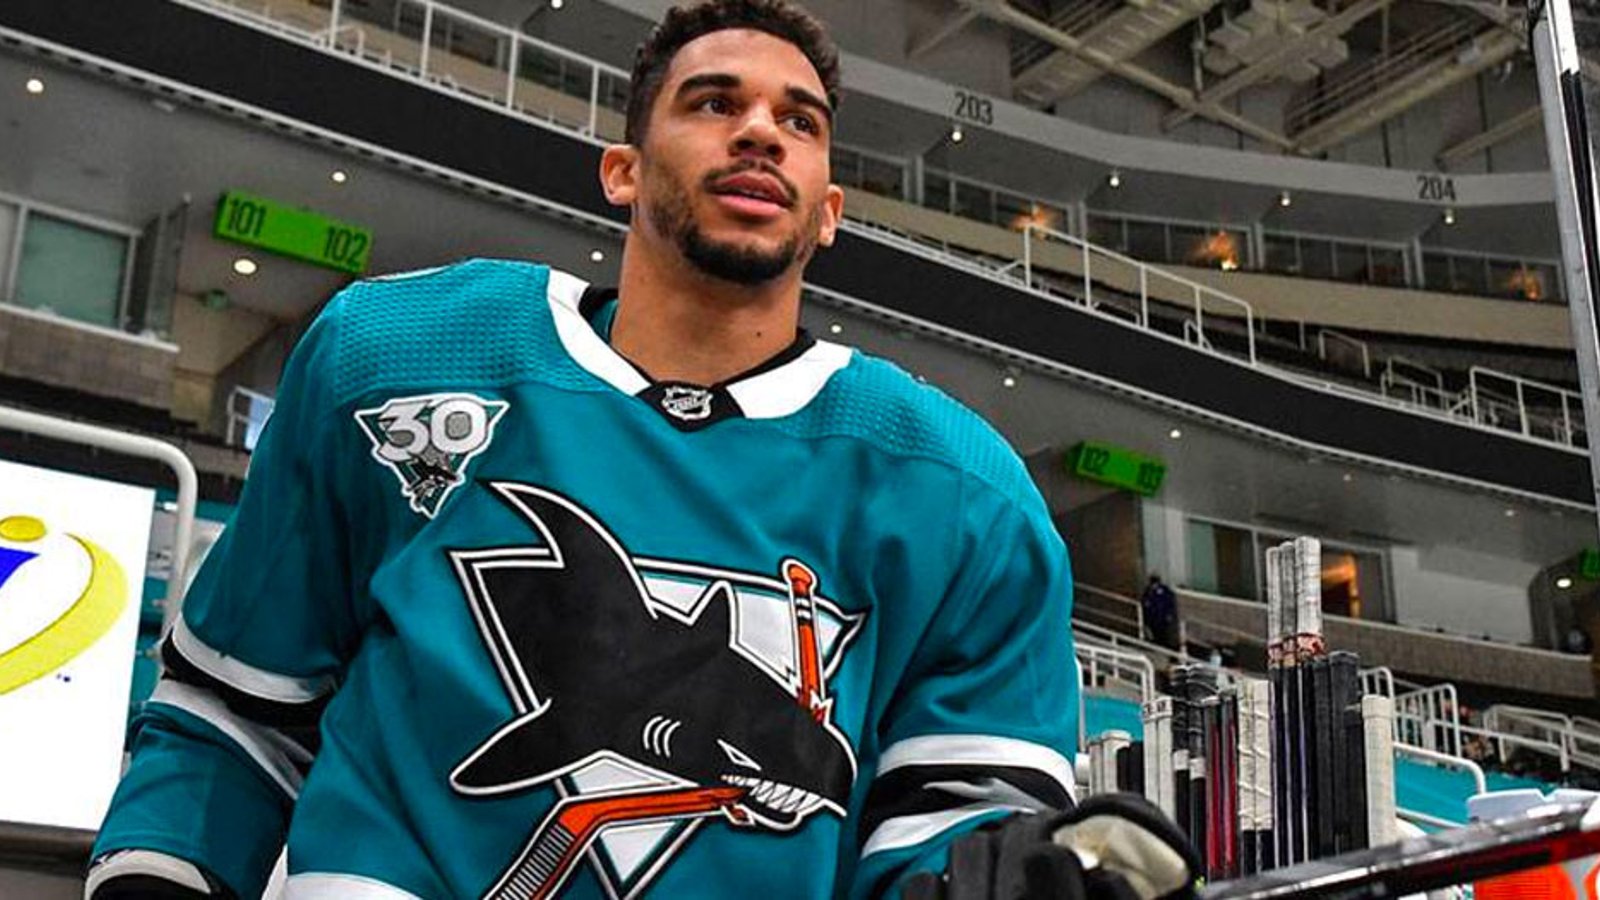 NHL announces another new investigation into Evander Kane